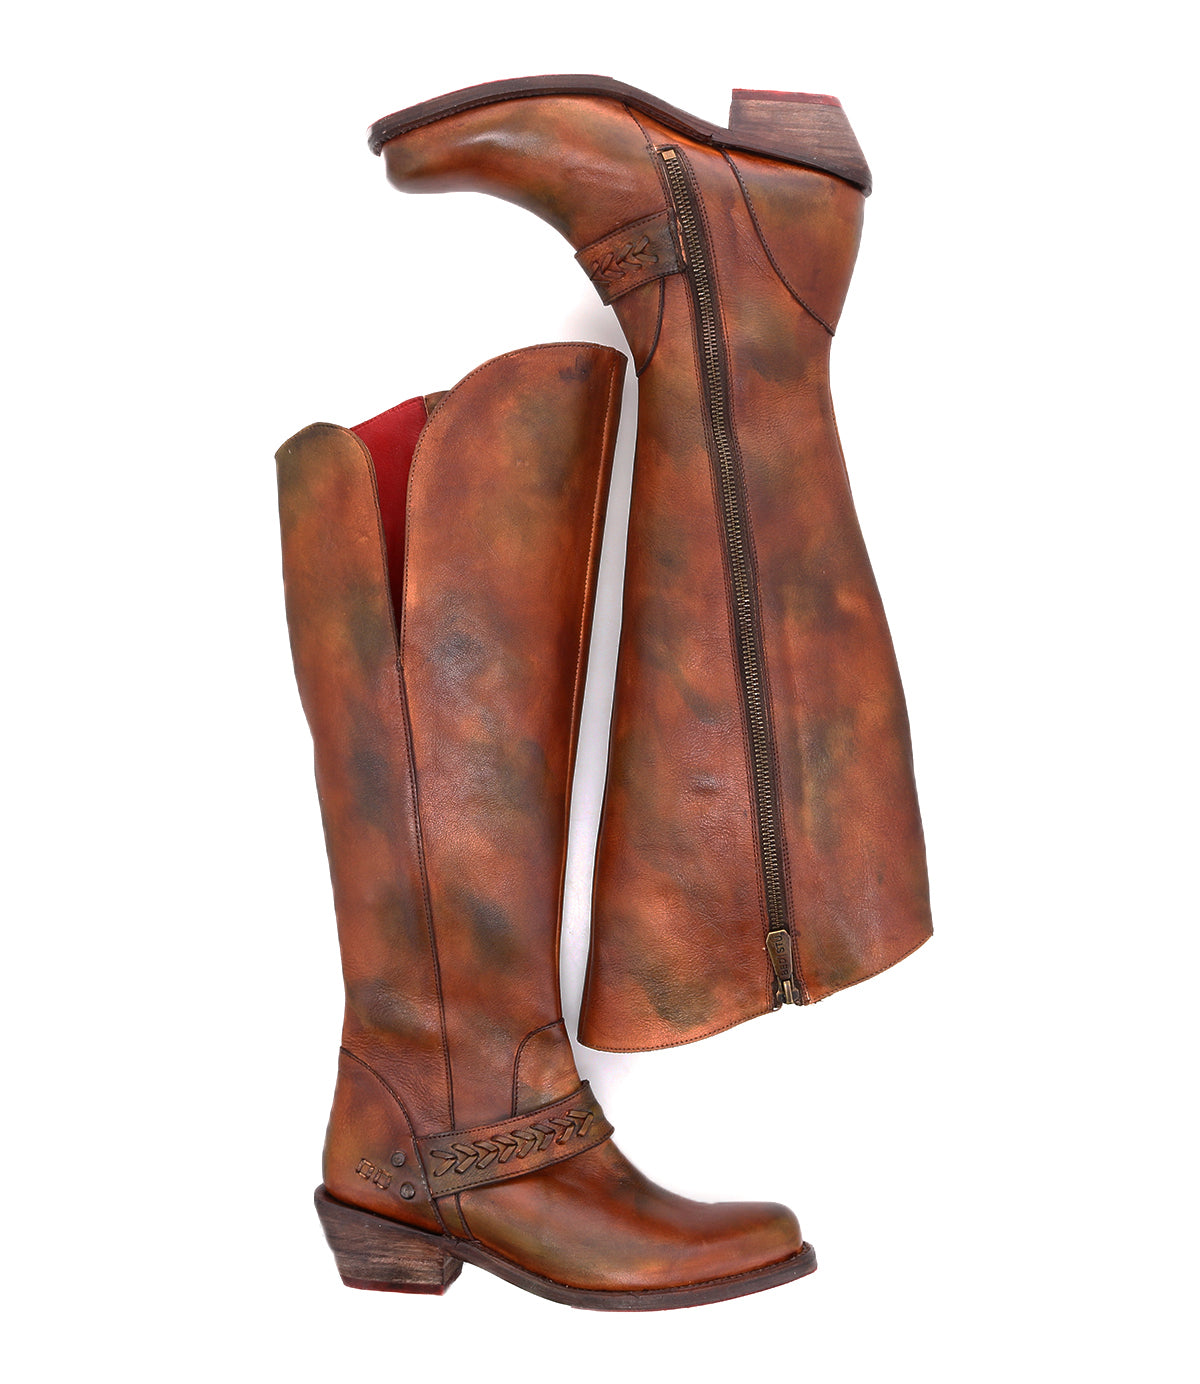 A pair of Bed Stu Takoma women's brown leather boots on a white background.